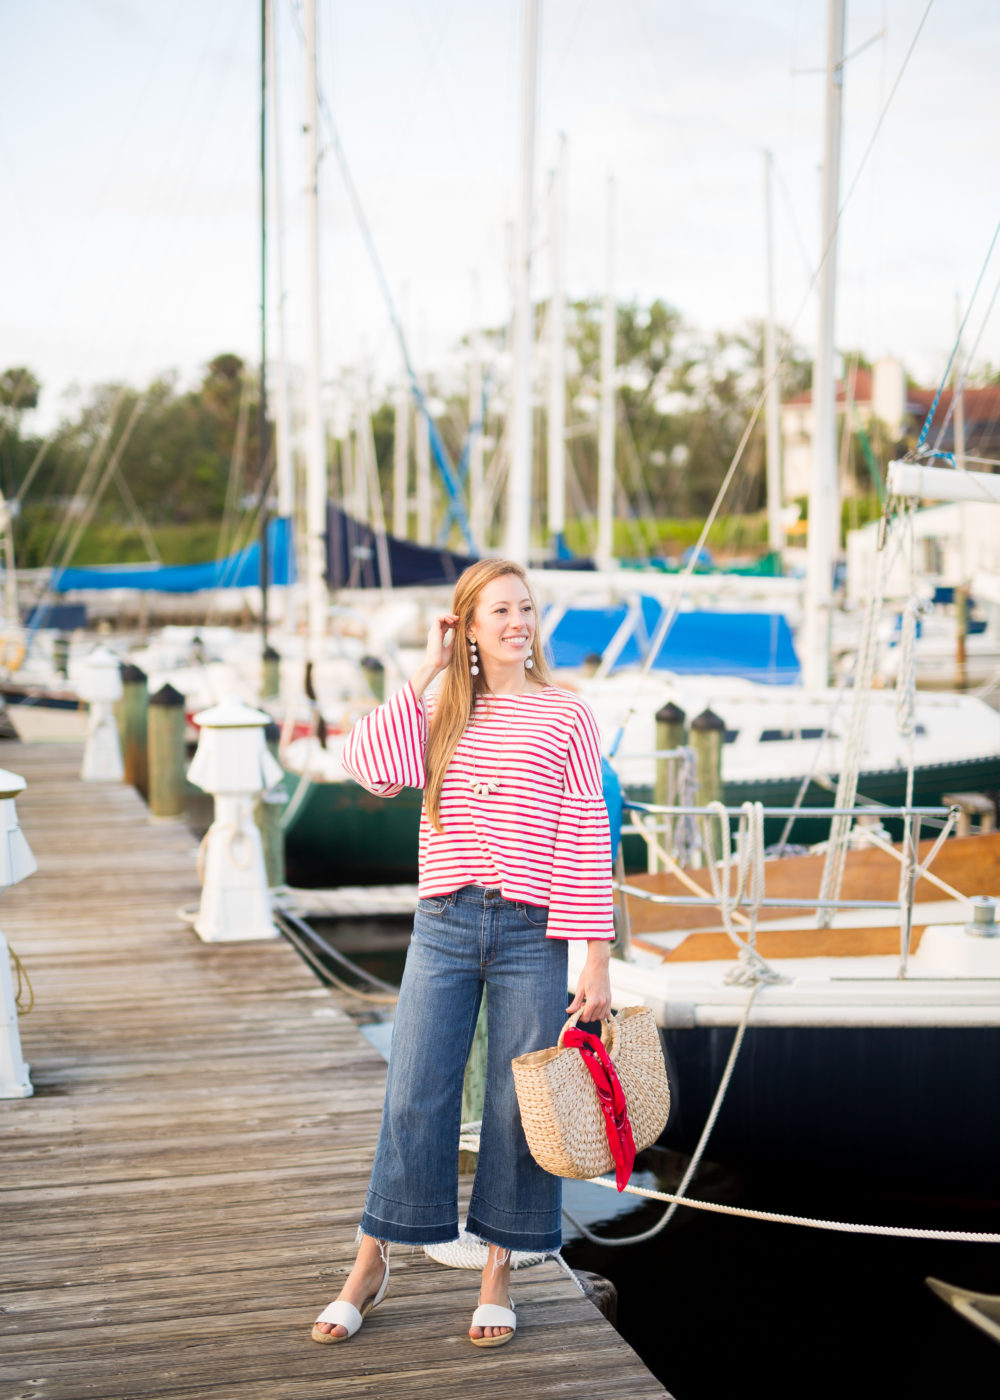 A Classic Striped Look for Fall, Wearing Wide Leg Pants + Striped Top | Sunshine Style